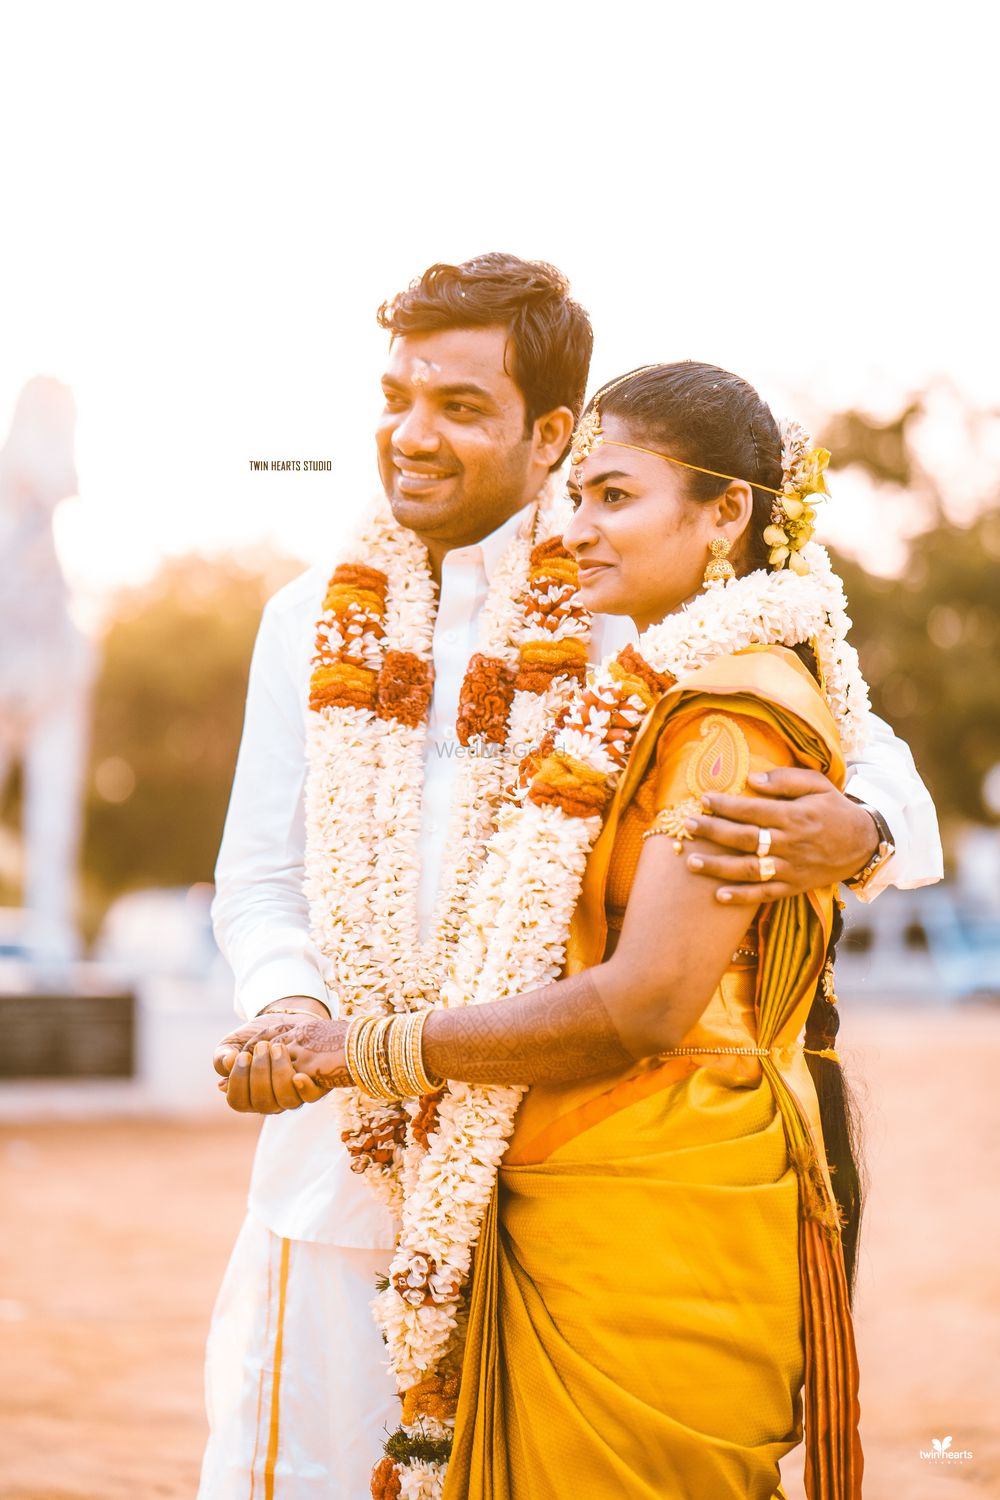 Photo From PUGAL & JOTHI - By Twin Hearts Studio